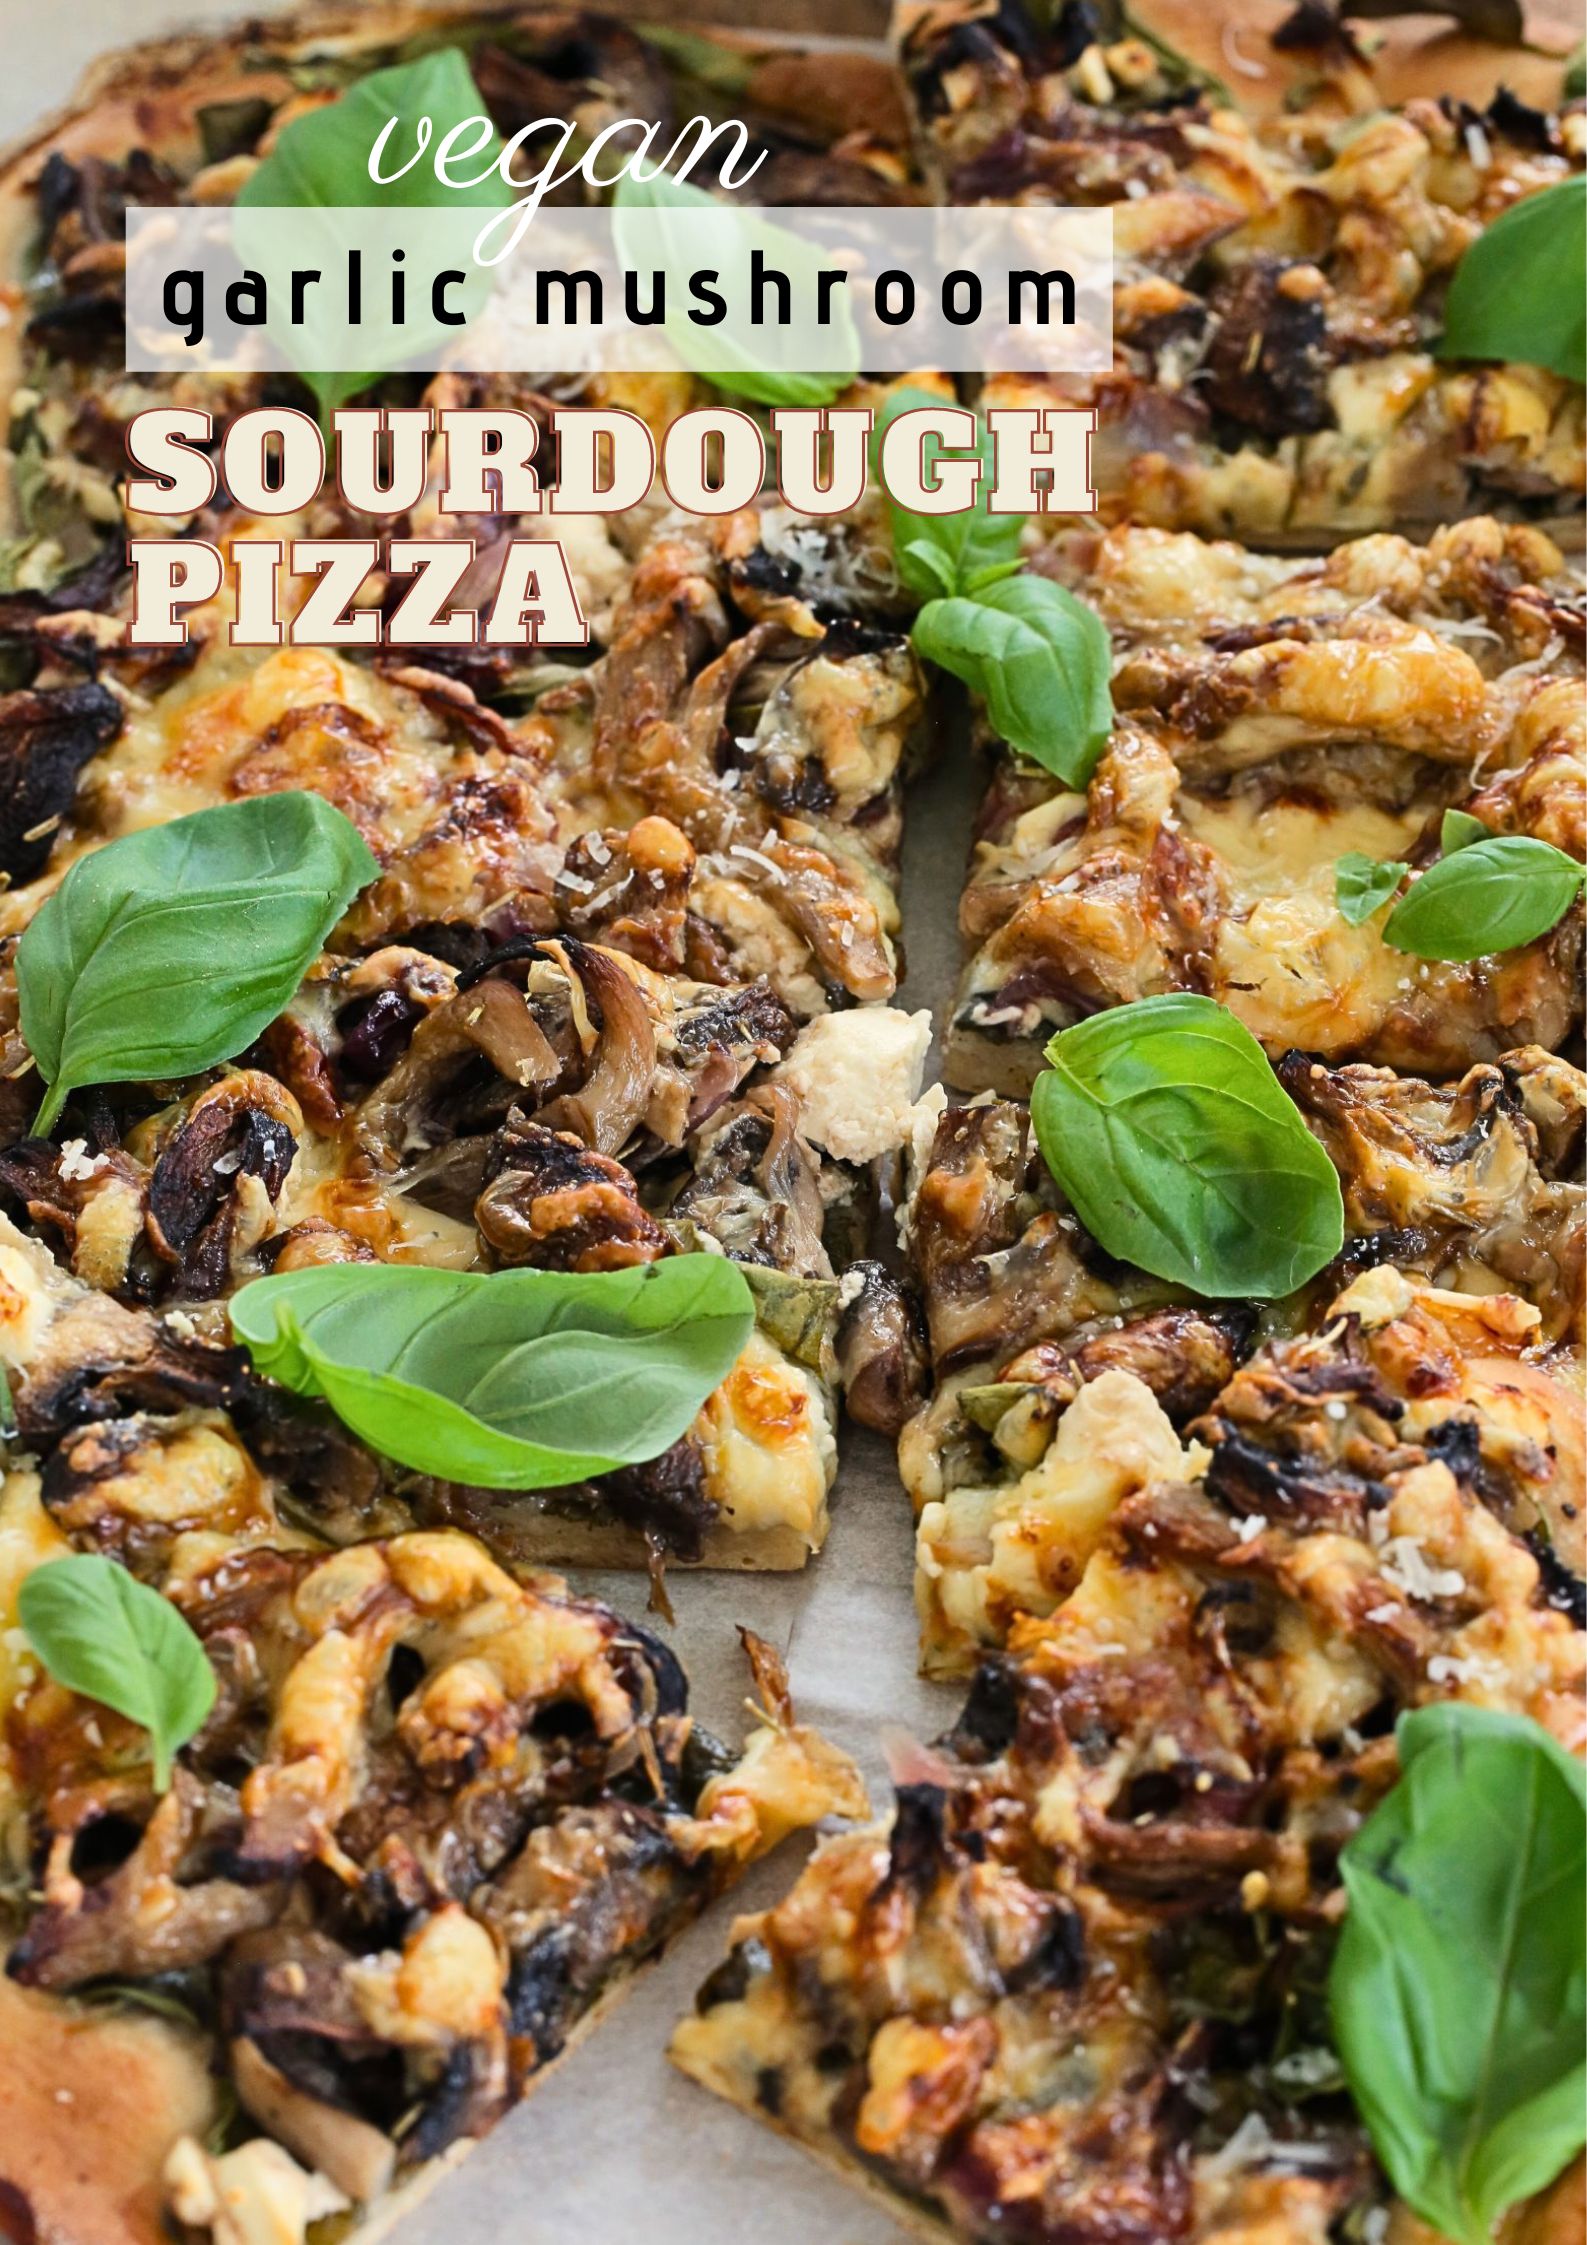 Soft, chewy, and cheesy, this garlic mushroom sourdough pizza is the perfect recipe for pizza night. Loaded with herby garlic mushrooms, spinach and two types of vegan cheese this will be a new family favourite! #veganpizza #sourdough #sourdoughpizza #vegancheese